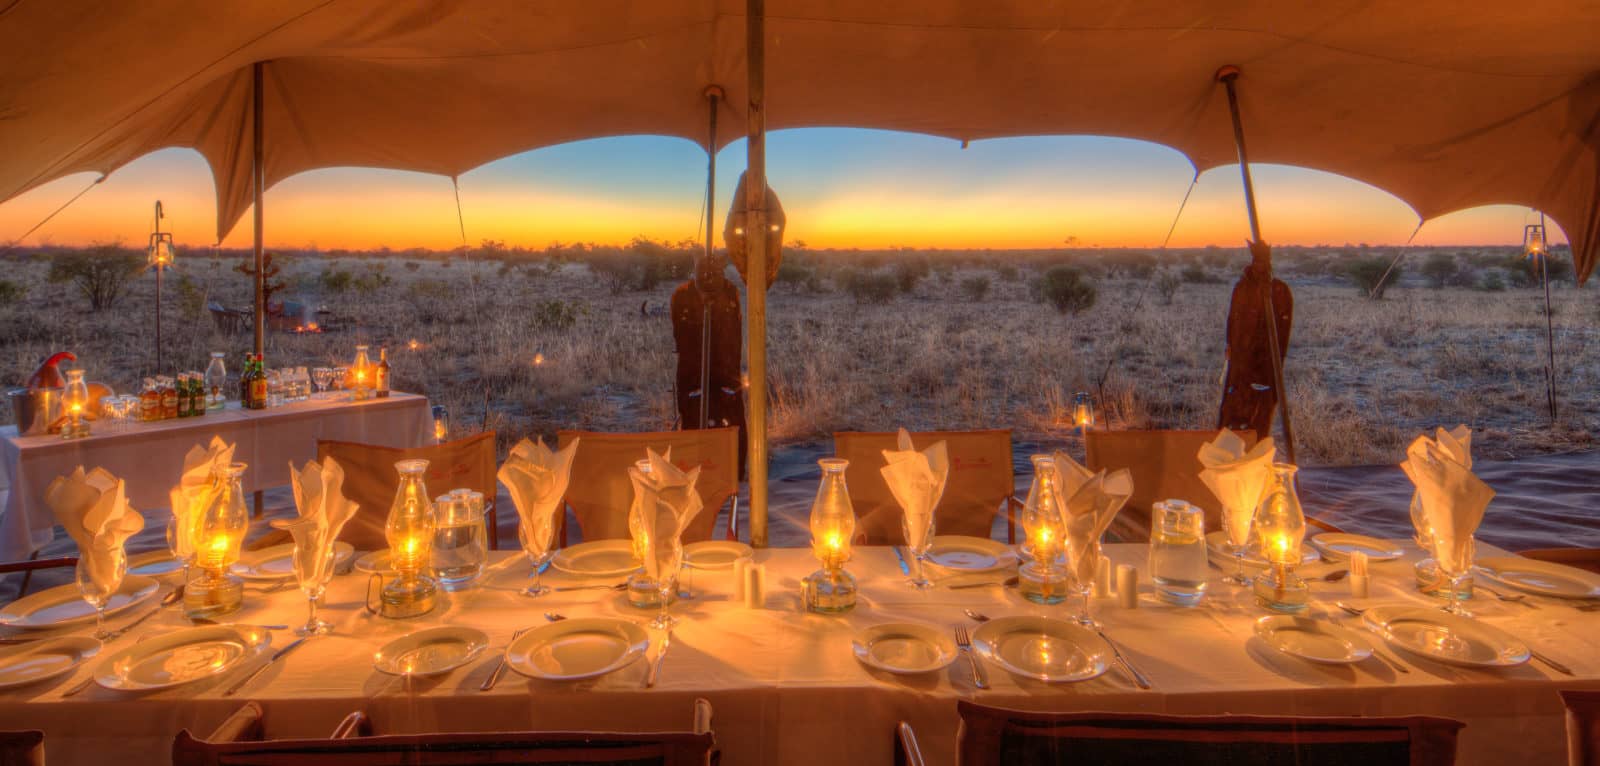 Guest dinner with a view on a Pride of Africa mobile safari